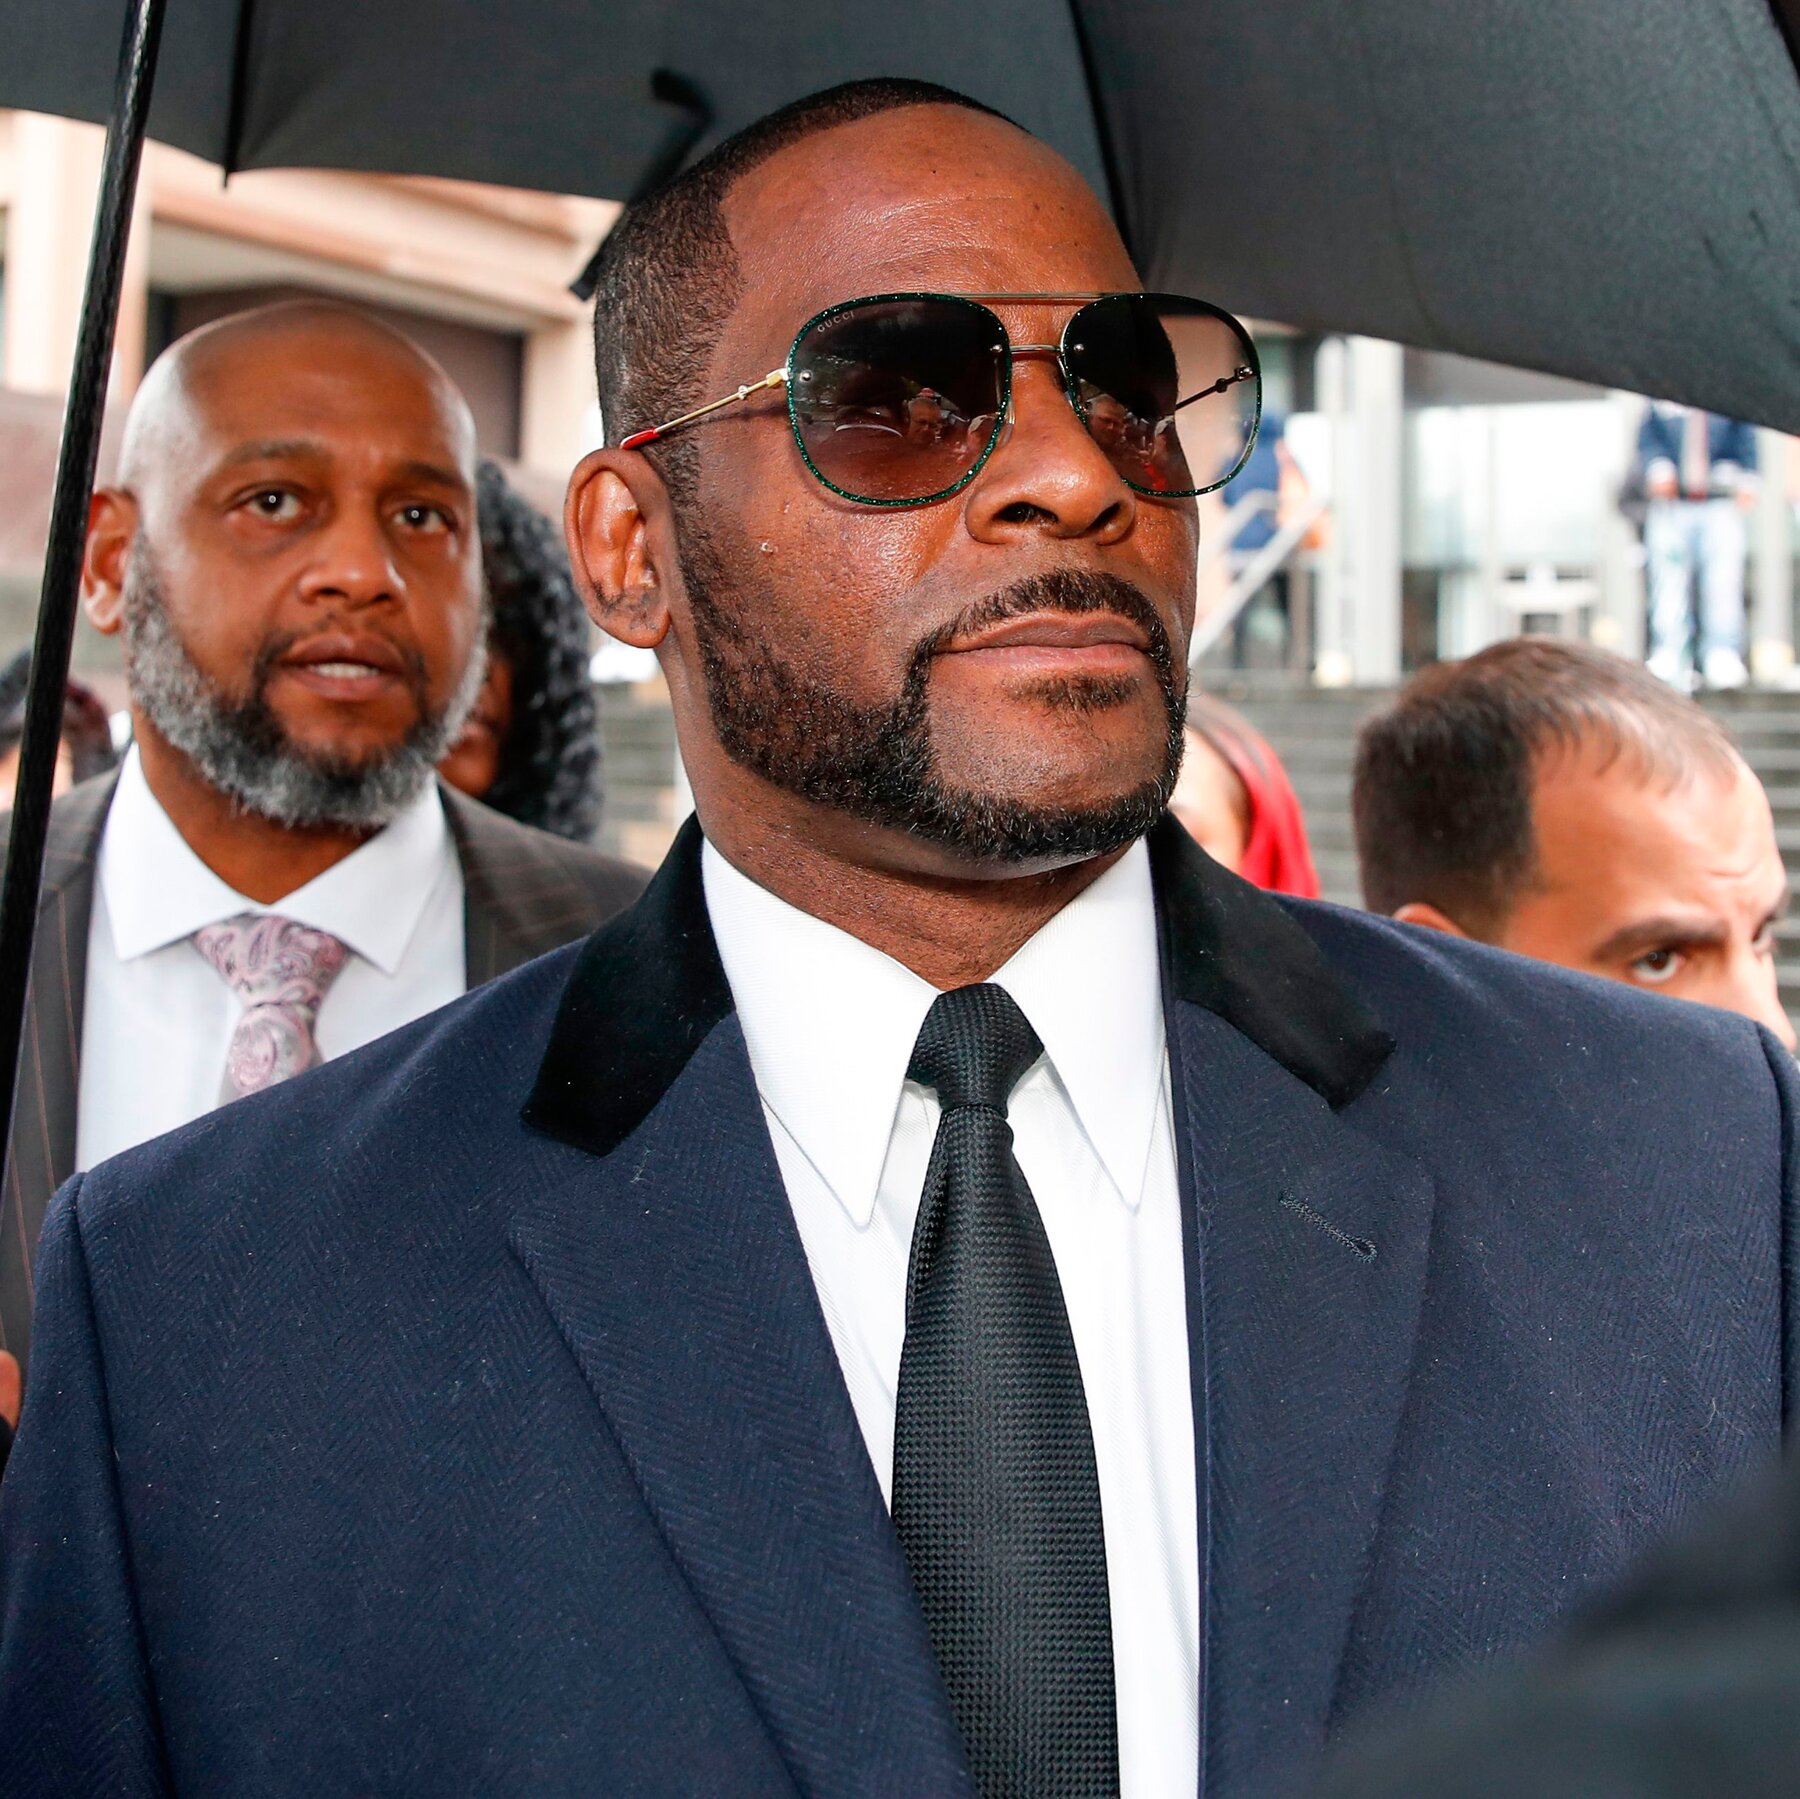 celebrities who committed crimes - Definitely the R. Kelly sh*t.